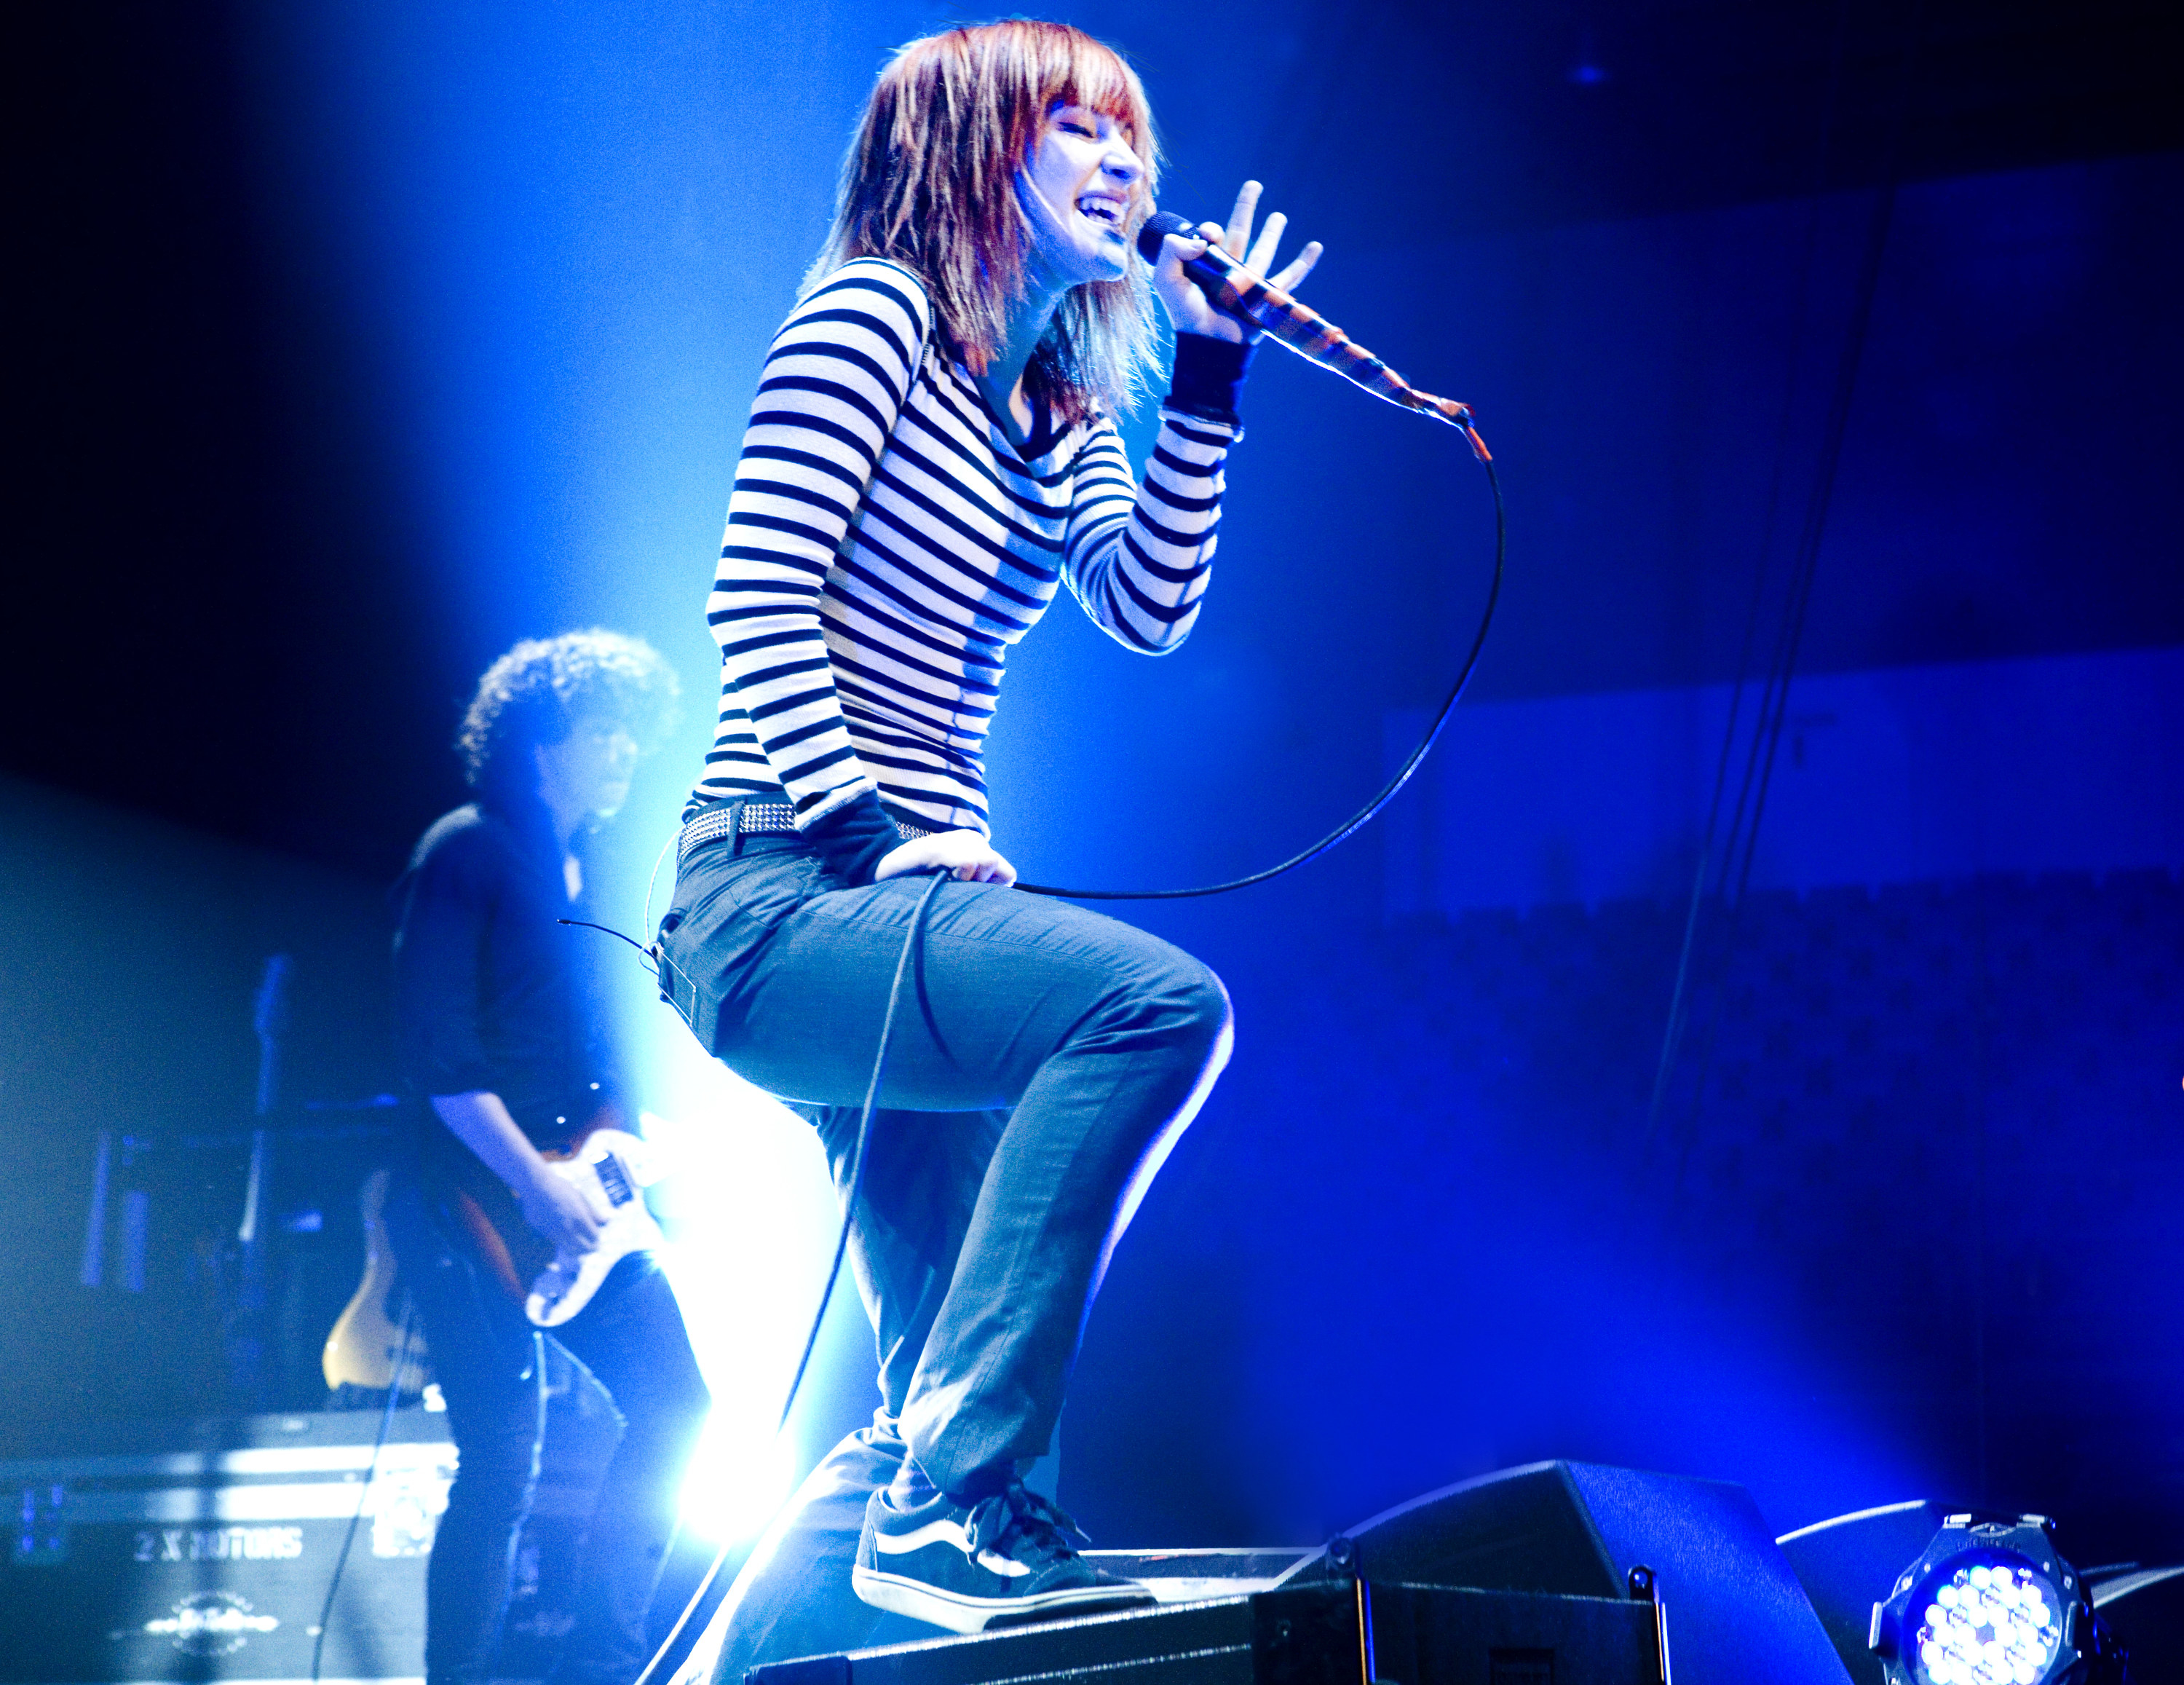 Hayley Williams performing on stage in 2006